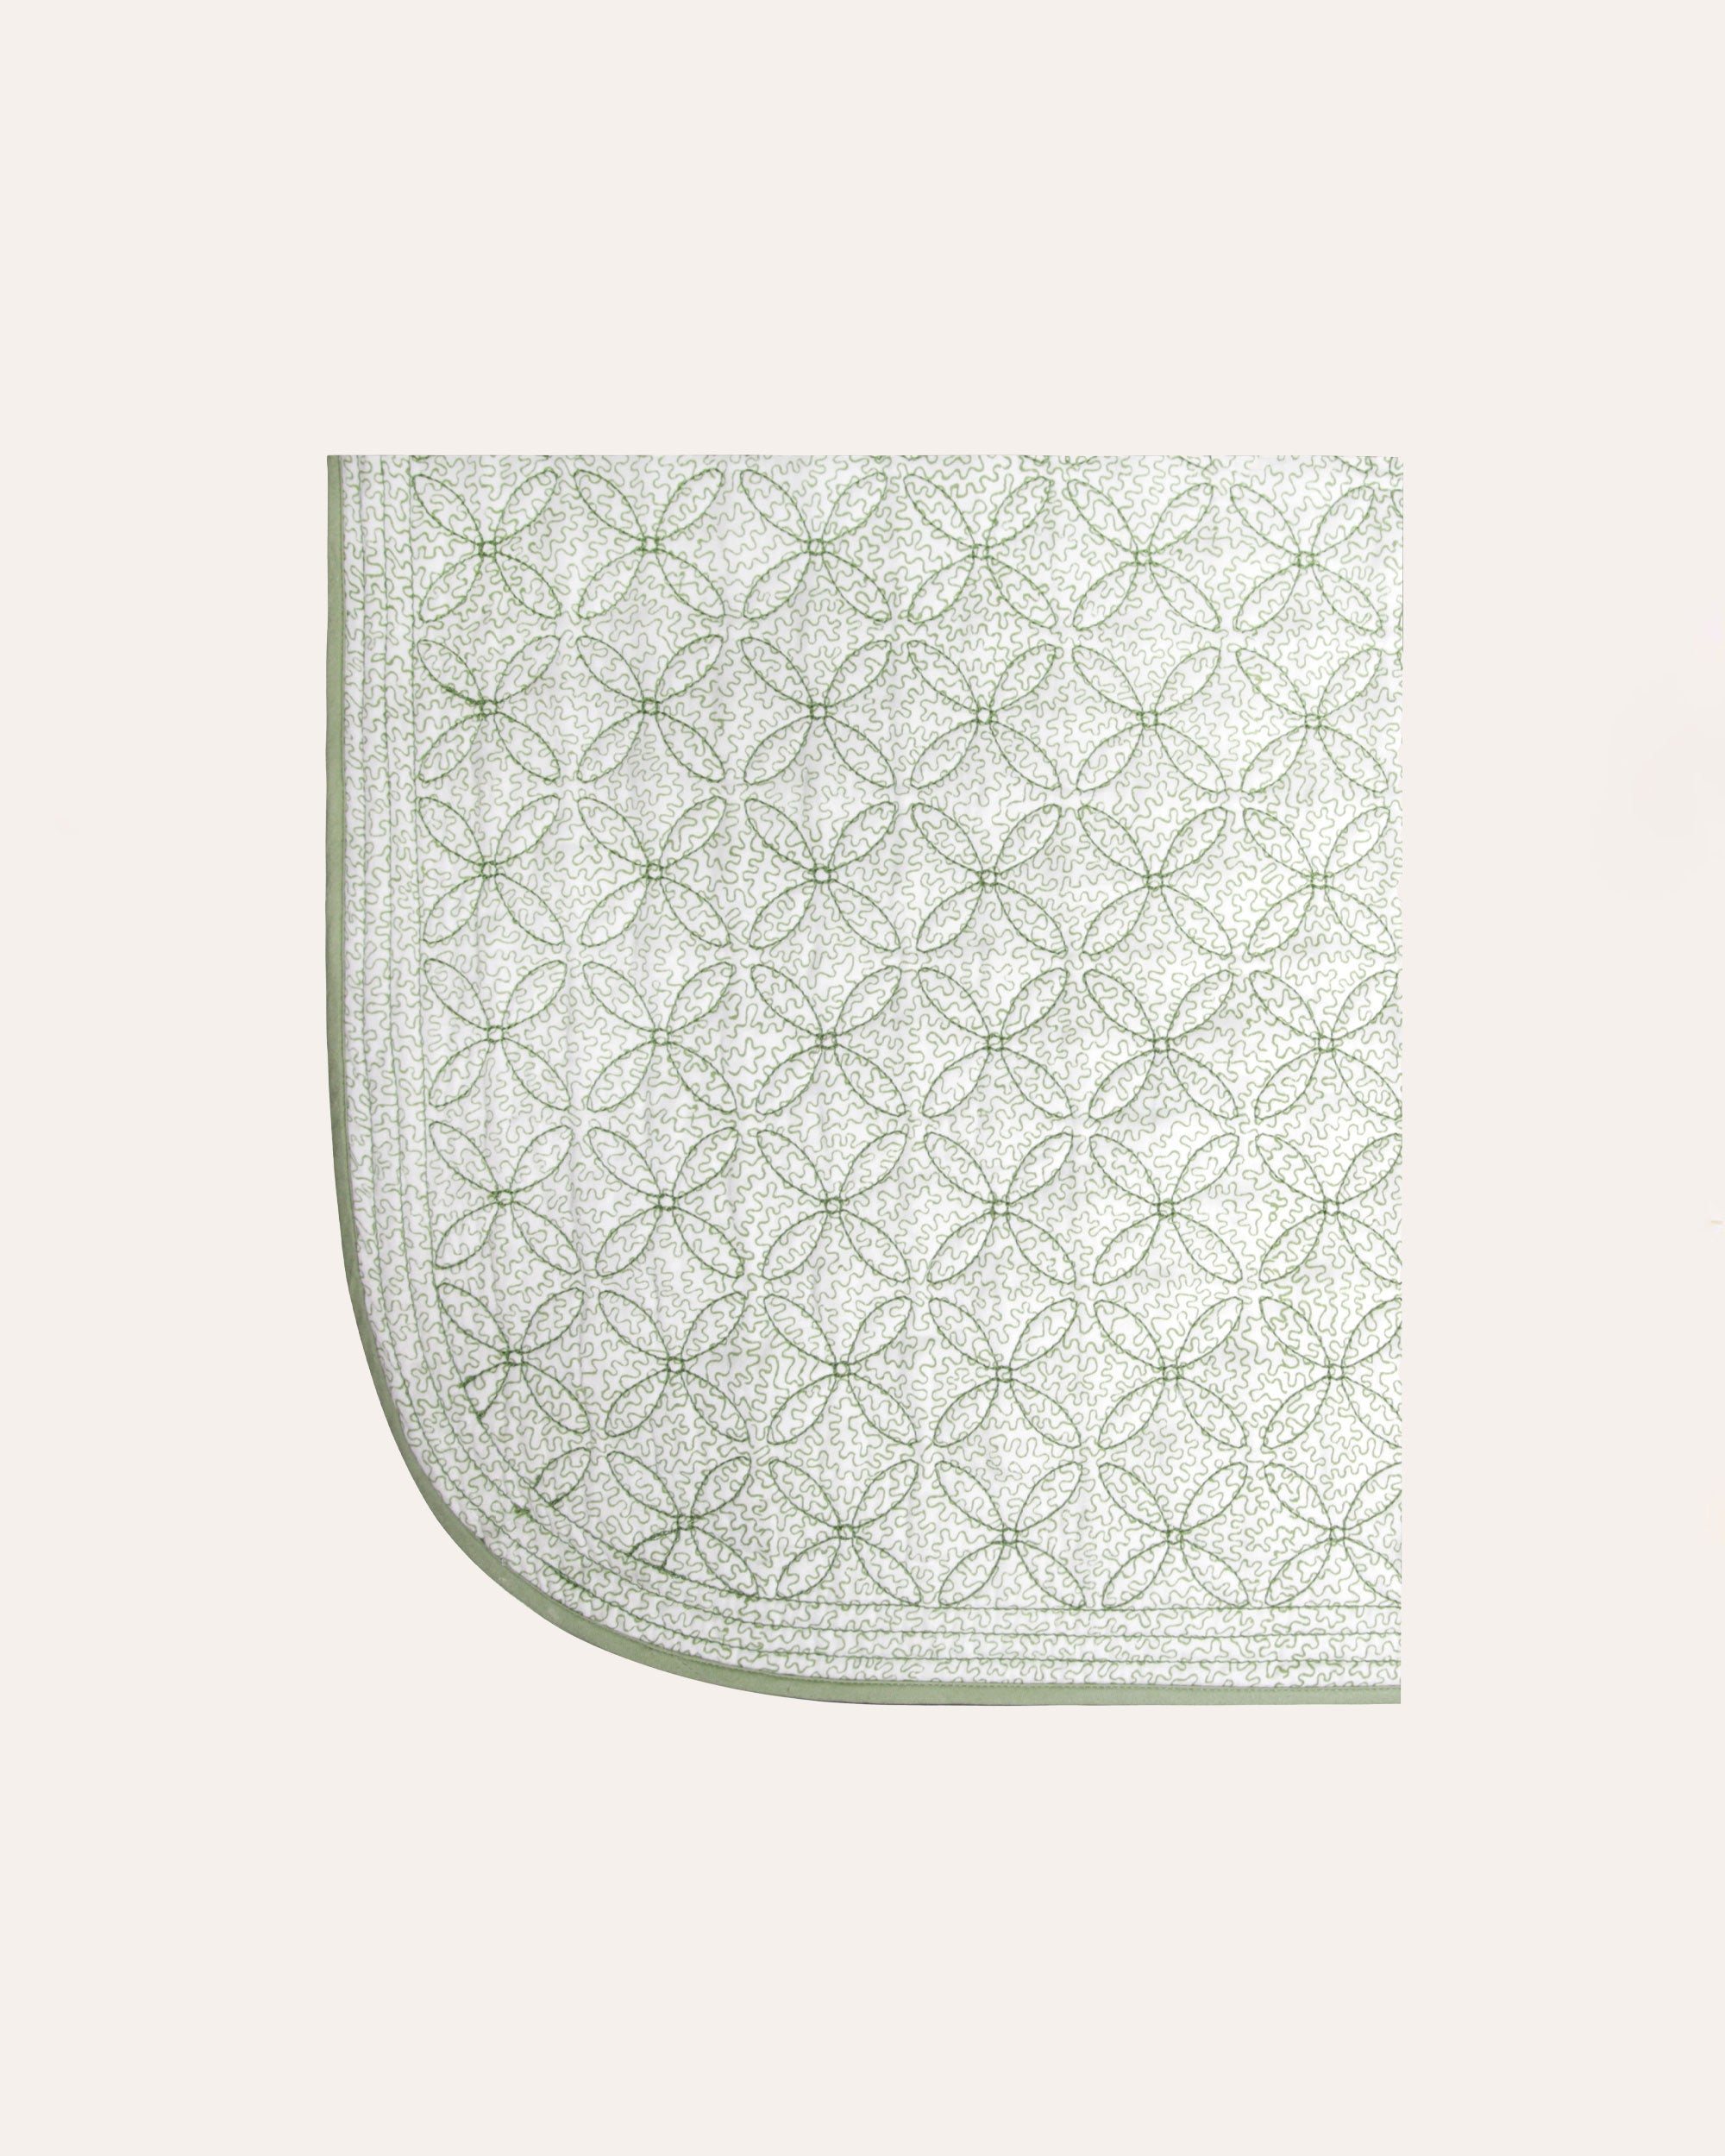 Trellis Embroidered Bedspread - Green